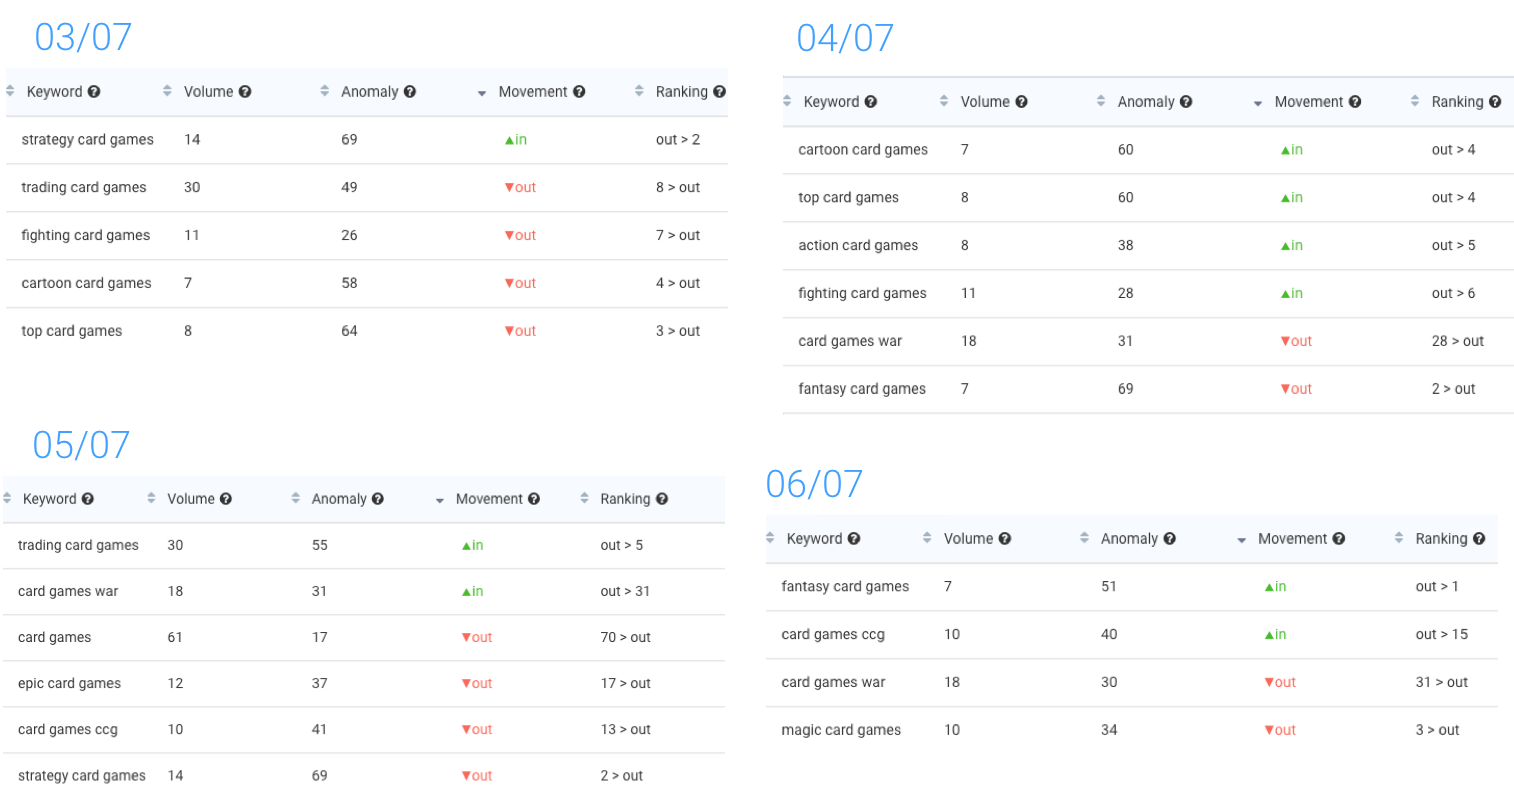 AppTweak ASO Keyword Movement Detector highlights the volatility of the Google algorithm for a set of keywords related to “card games” in defining Hearthstone’s rank. 